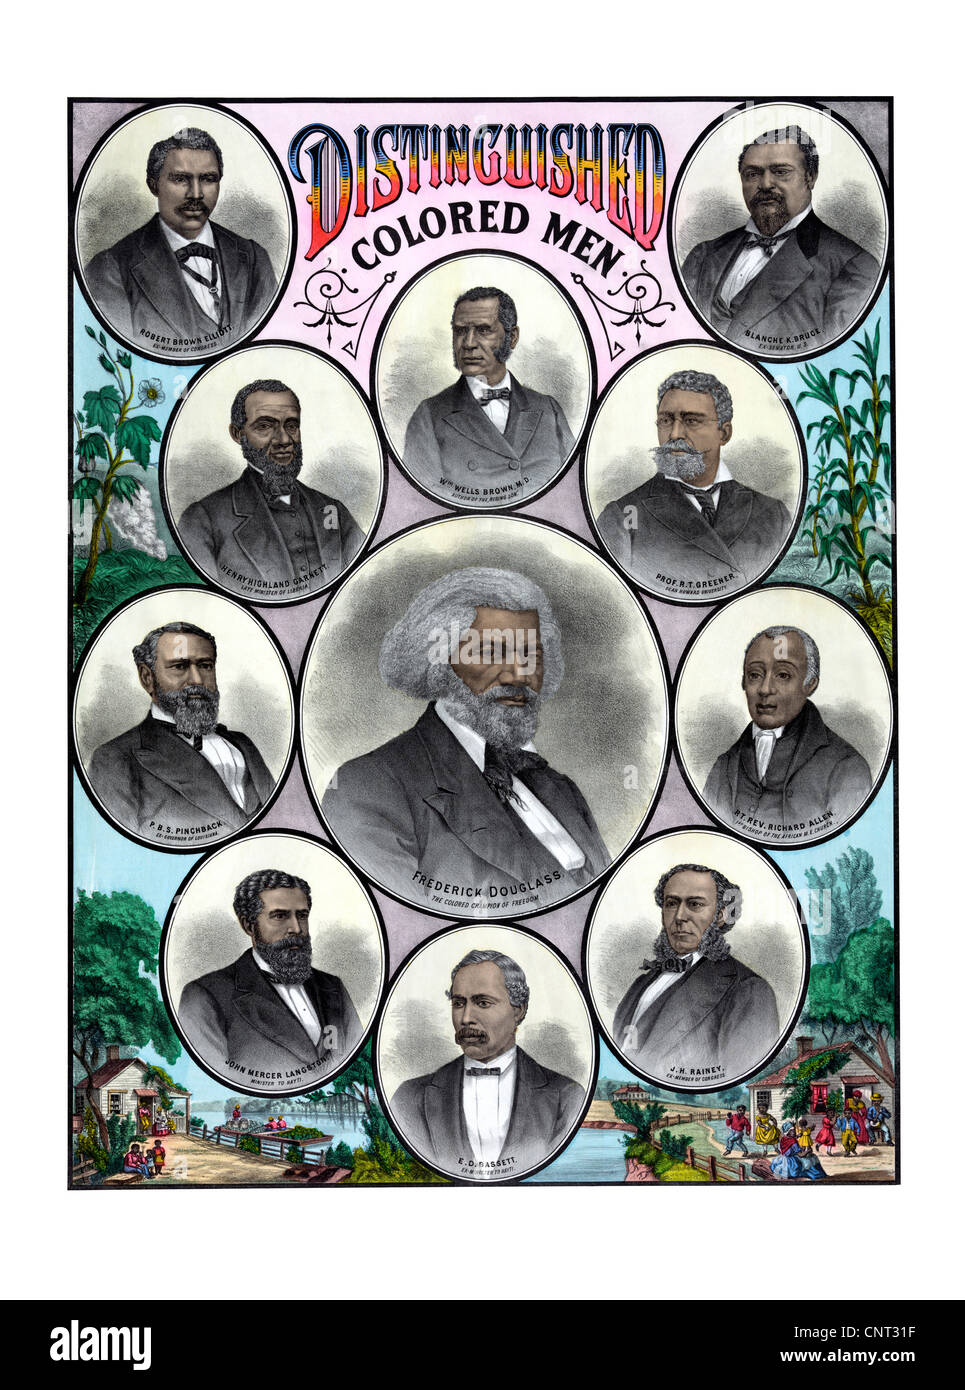 Vintage American History print featuring some of the 19th centuries most celebrated African American leaders. Stock Photo